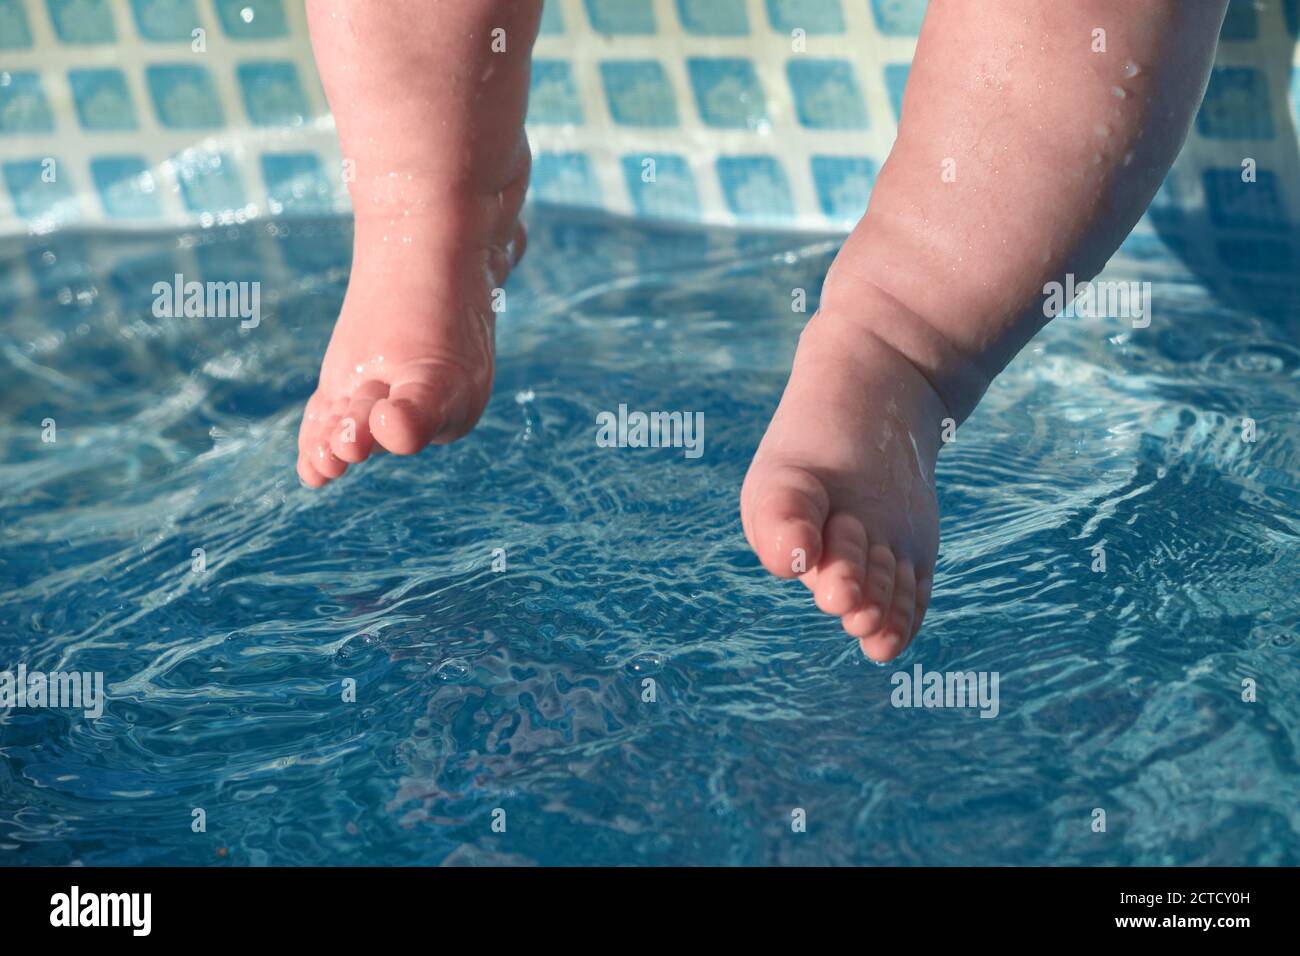 Baby's feet touch the blue water in the pool. Concept of newborn swimming training. Stock Photo